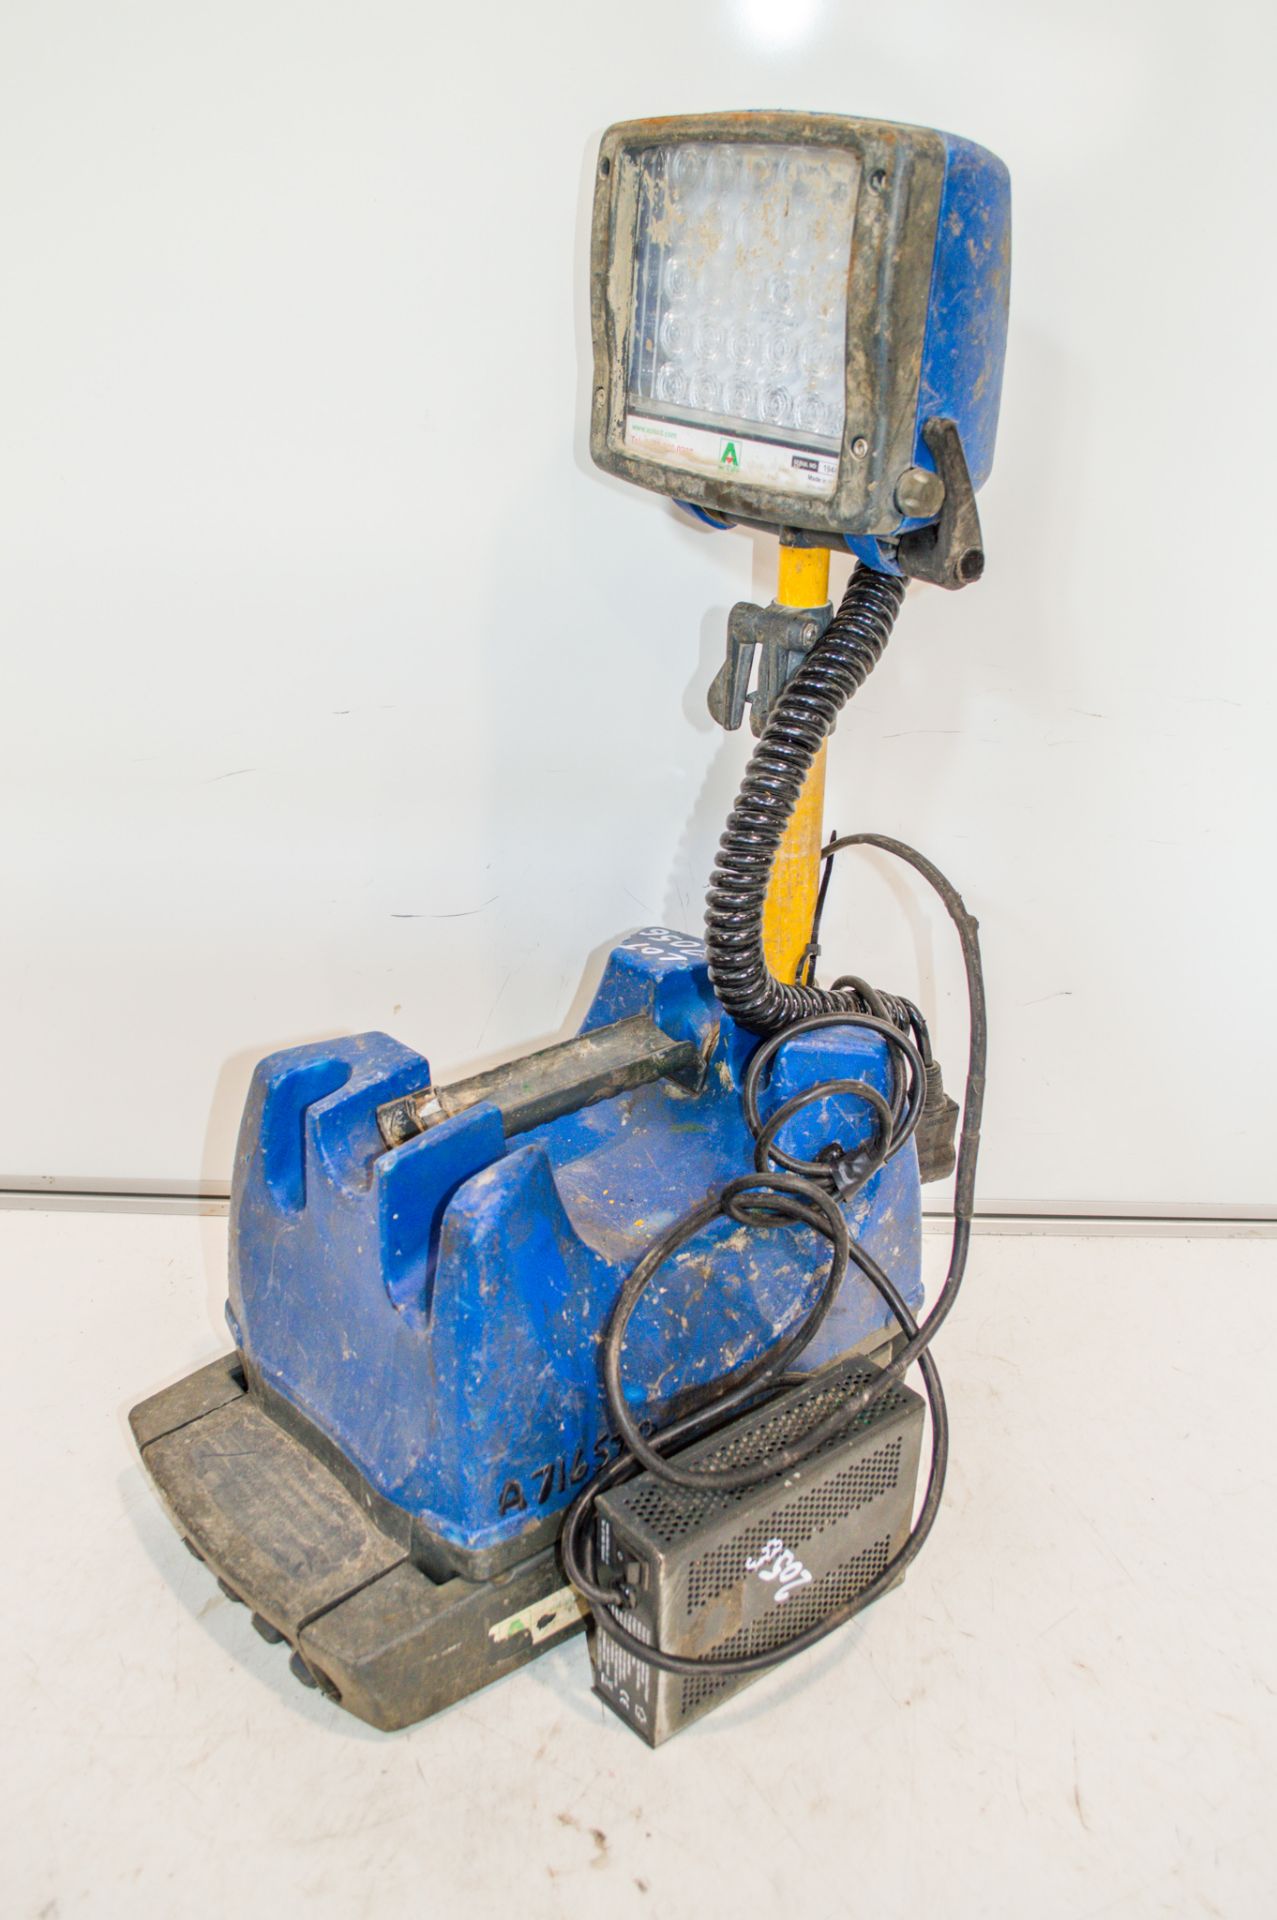 K9 LED rechargeable work light c/w charger A716570